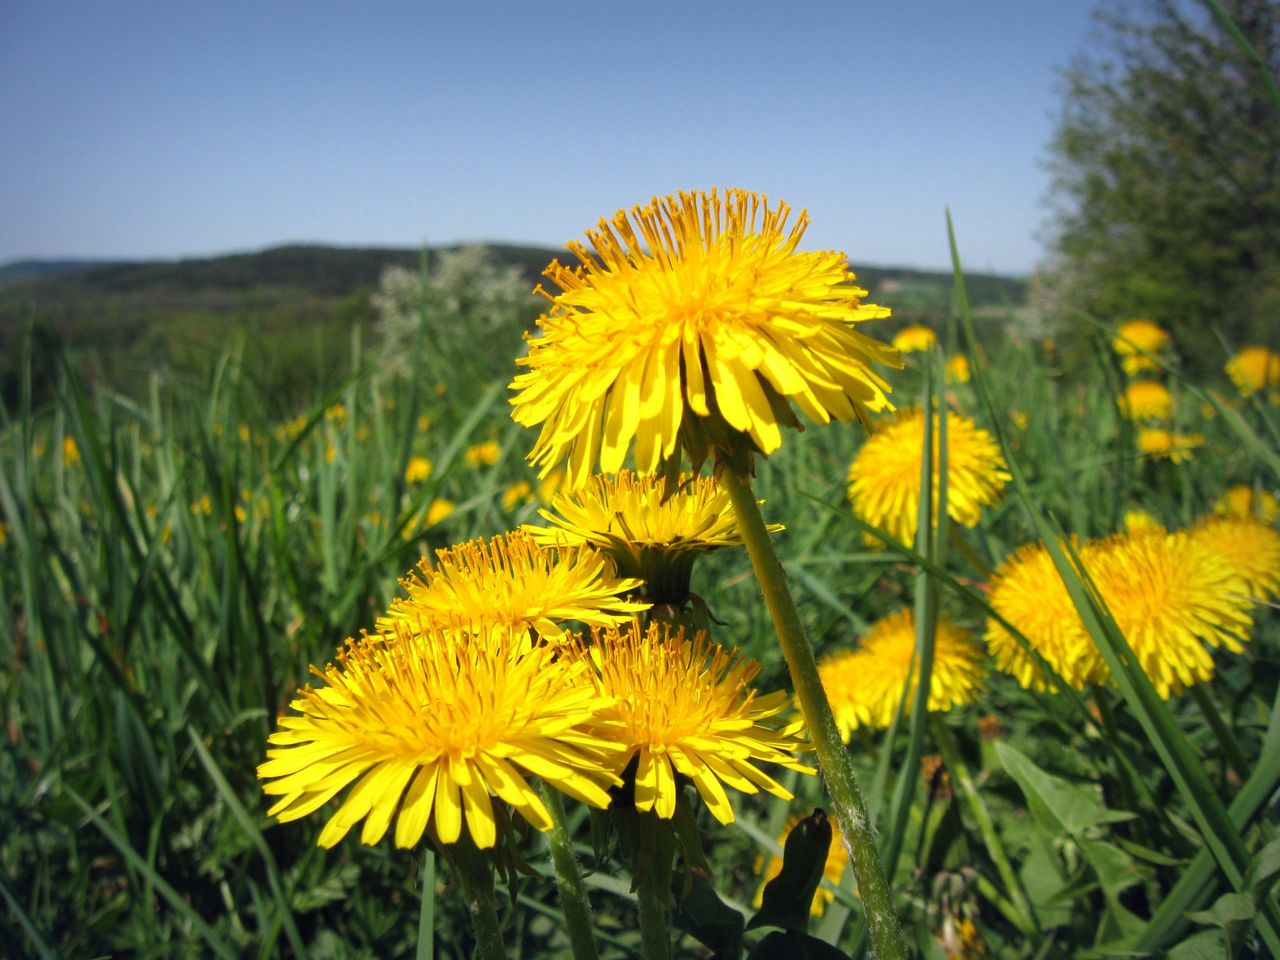 Sonchus on a meadow